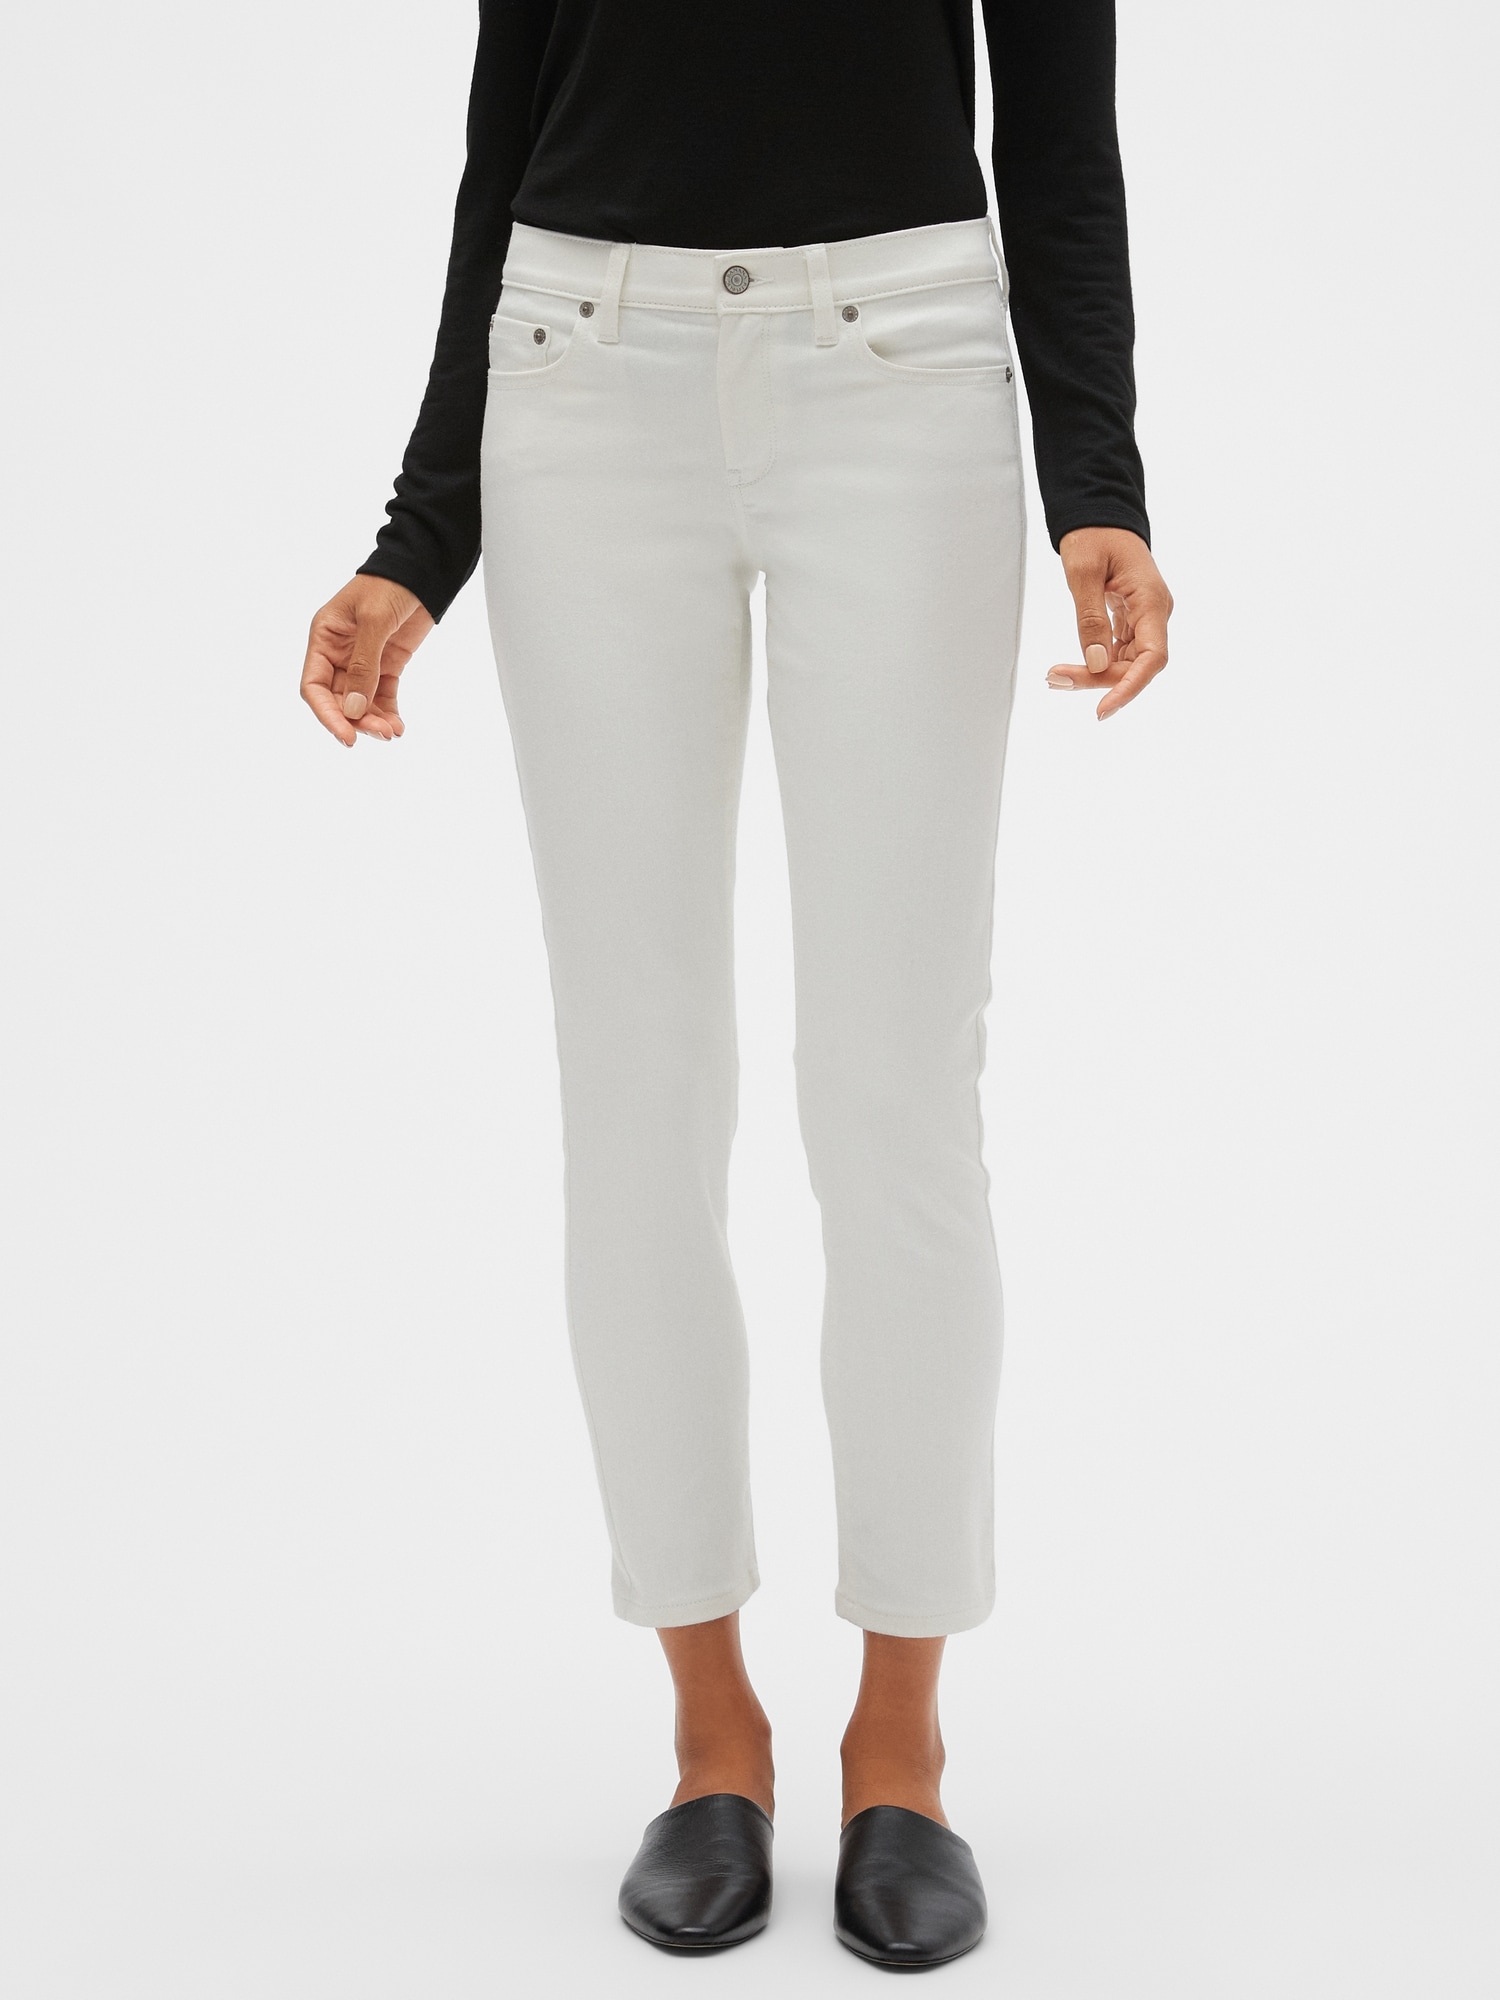 white skinny ankle jeans